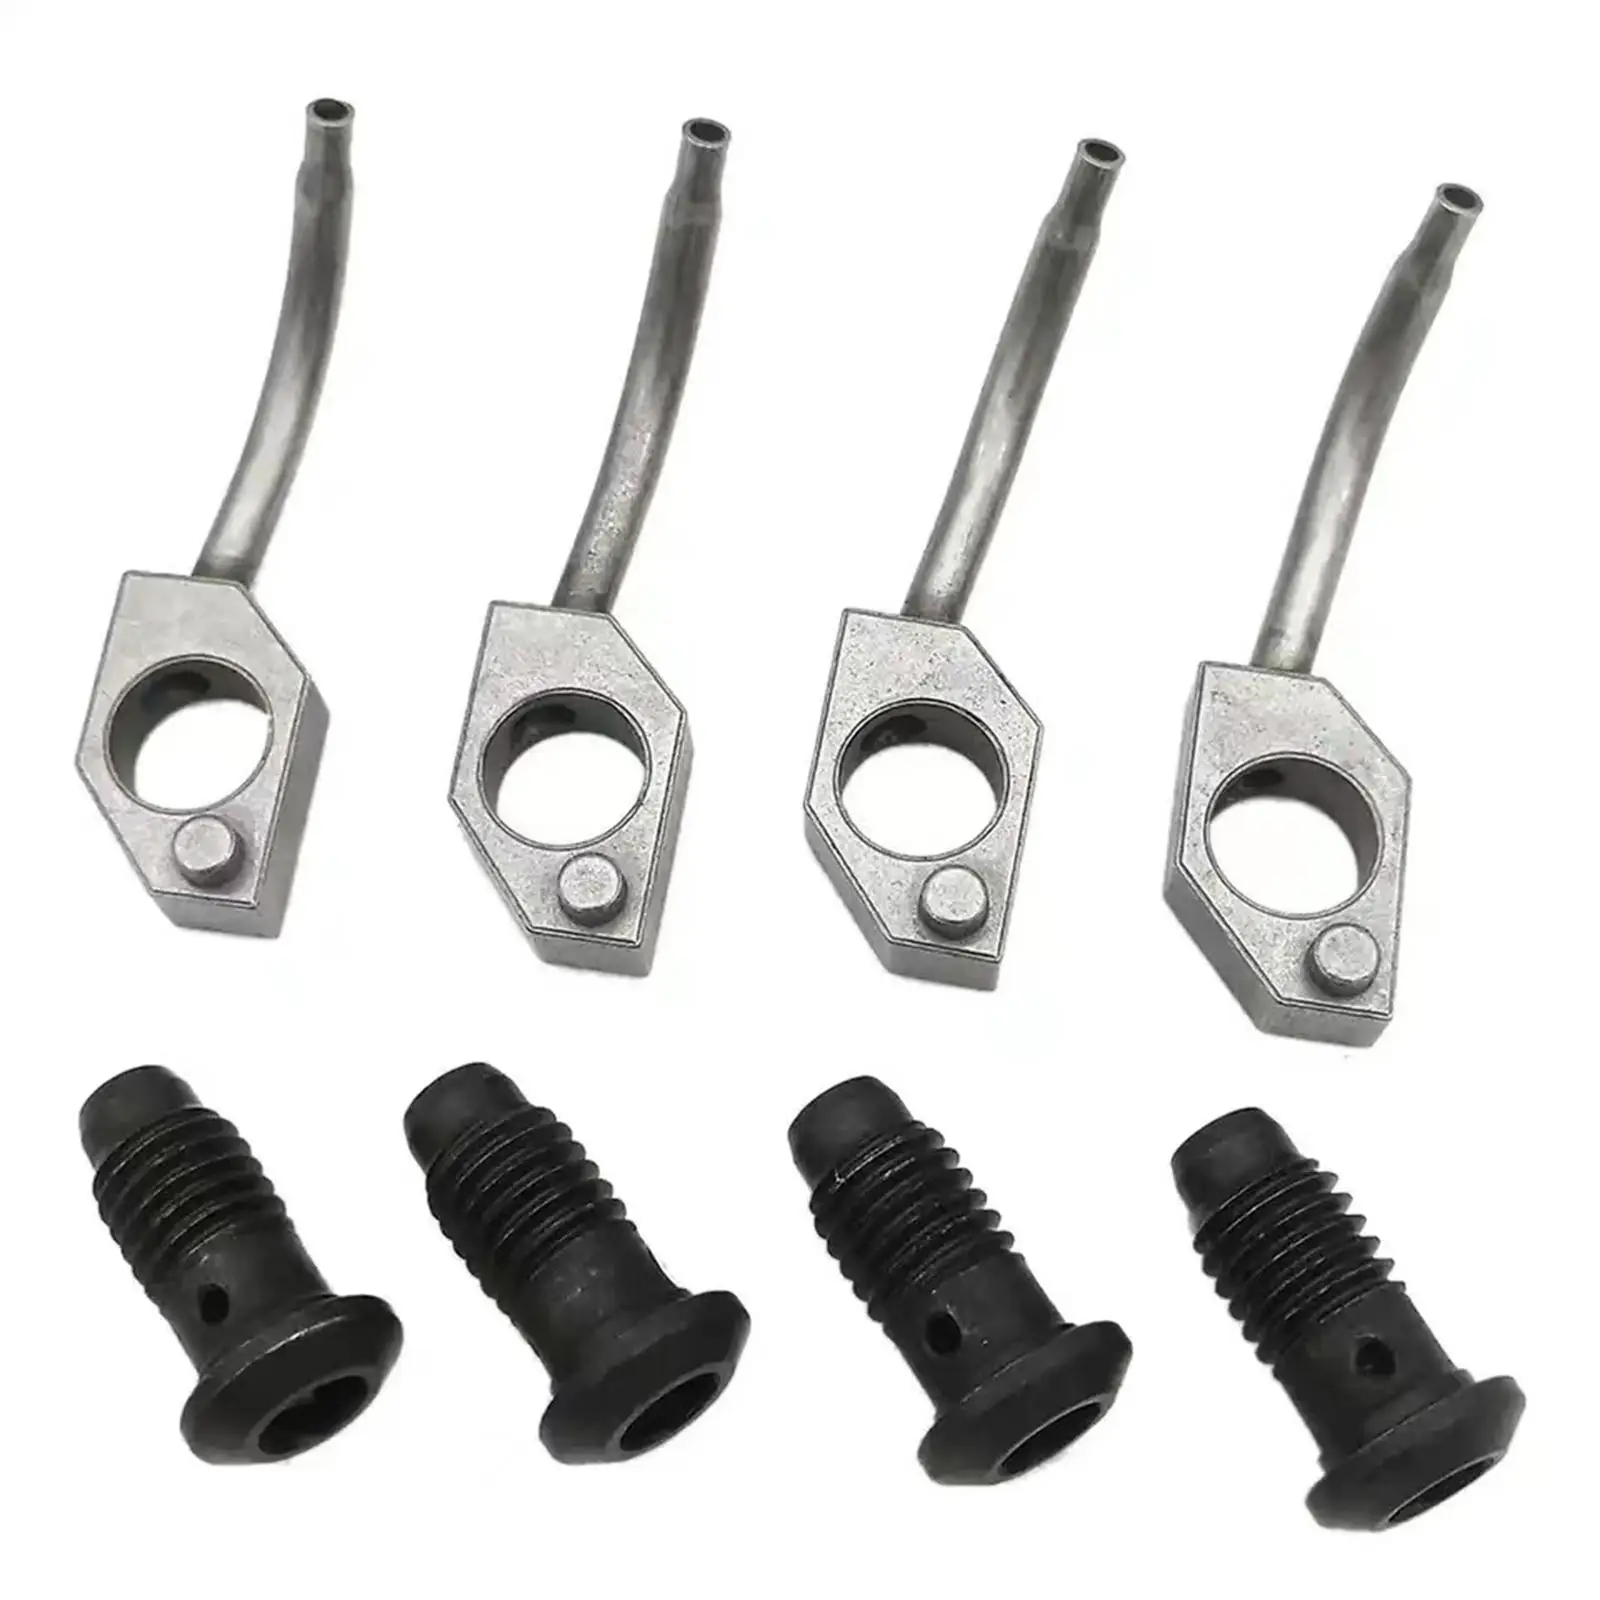 4 Pieces 55564441 Easy to Install Mounting Hardware Metal Engine Nozzle Set Direct Replaces Durable for Chevrolet Cruze